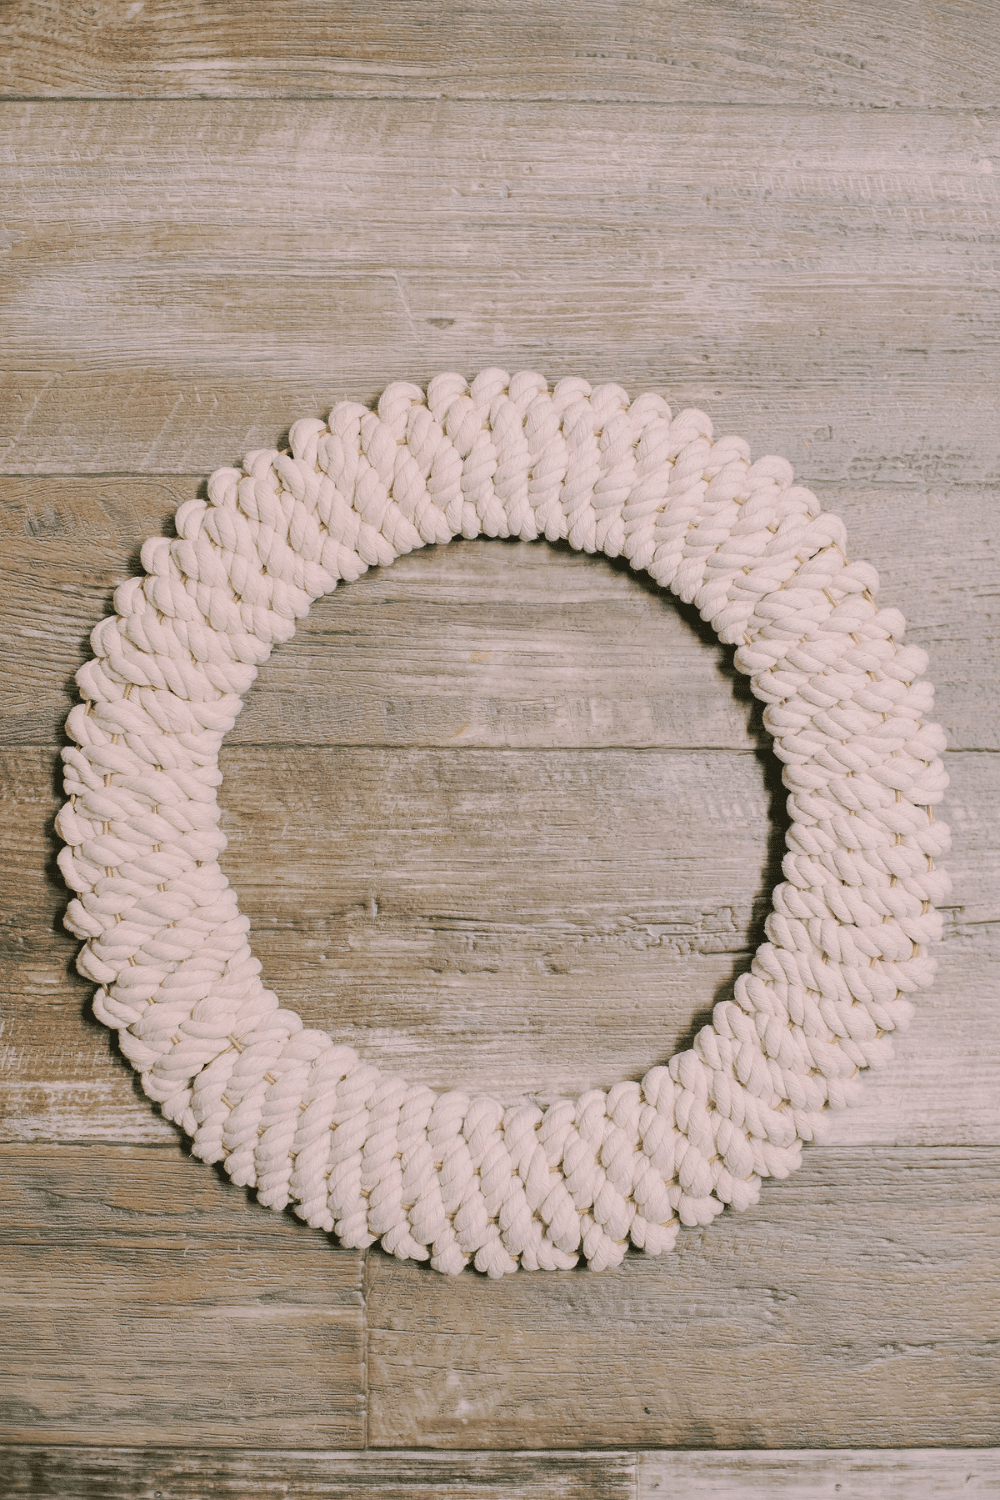 How to Make a Rope Wreath